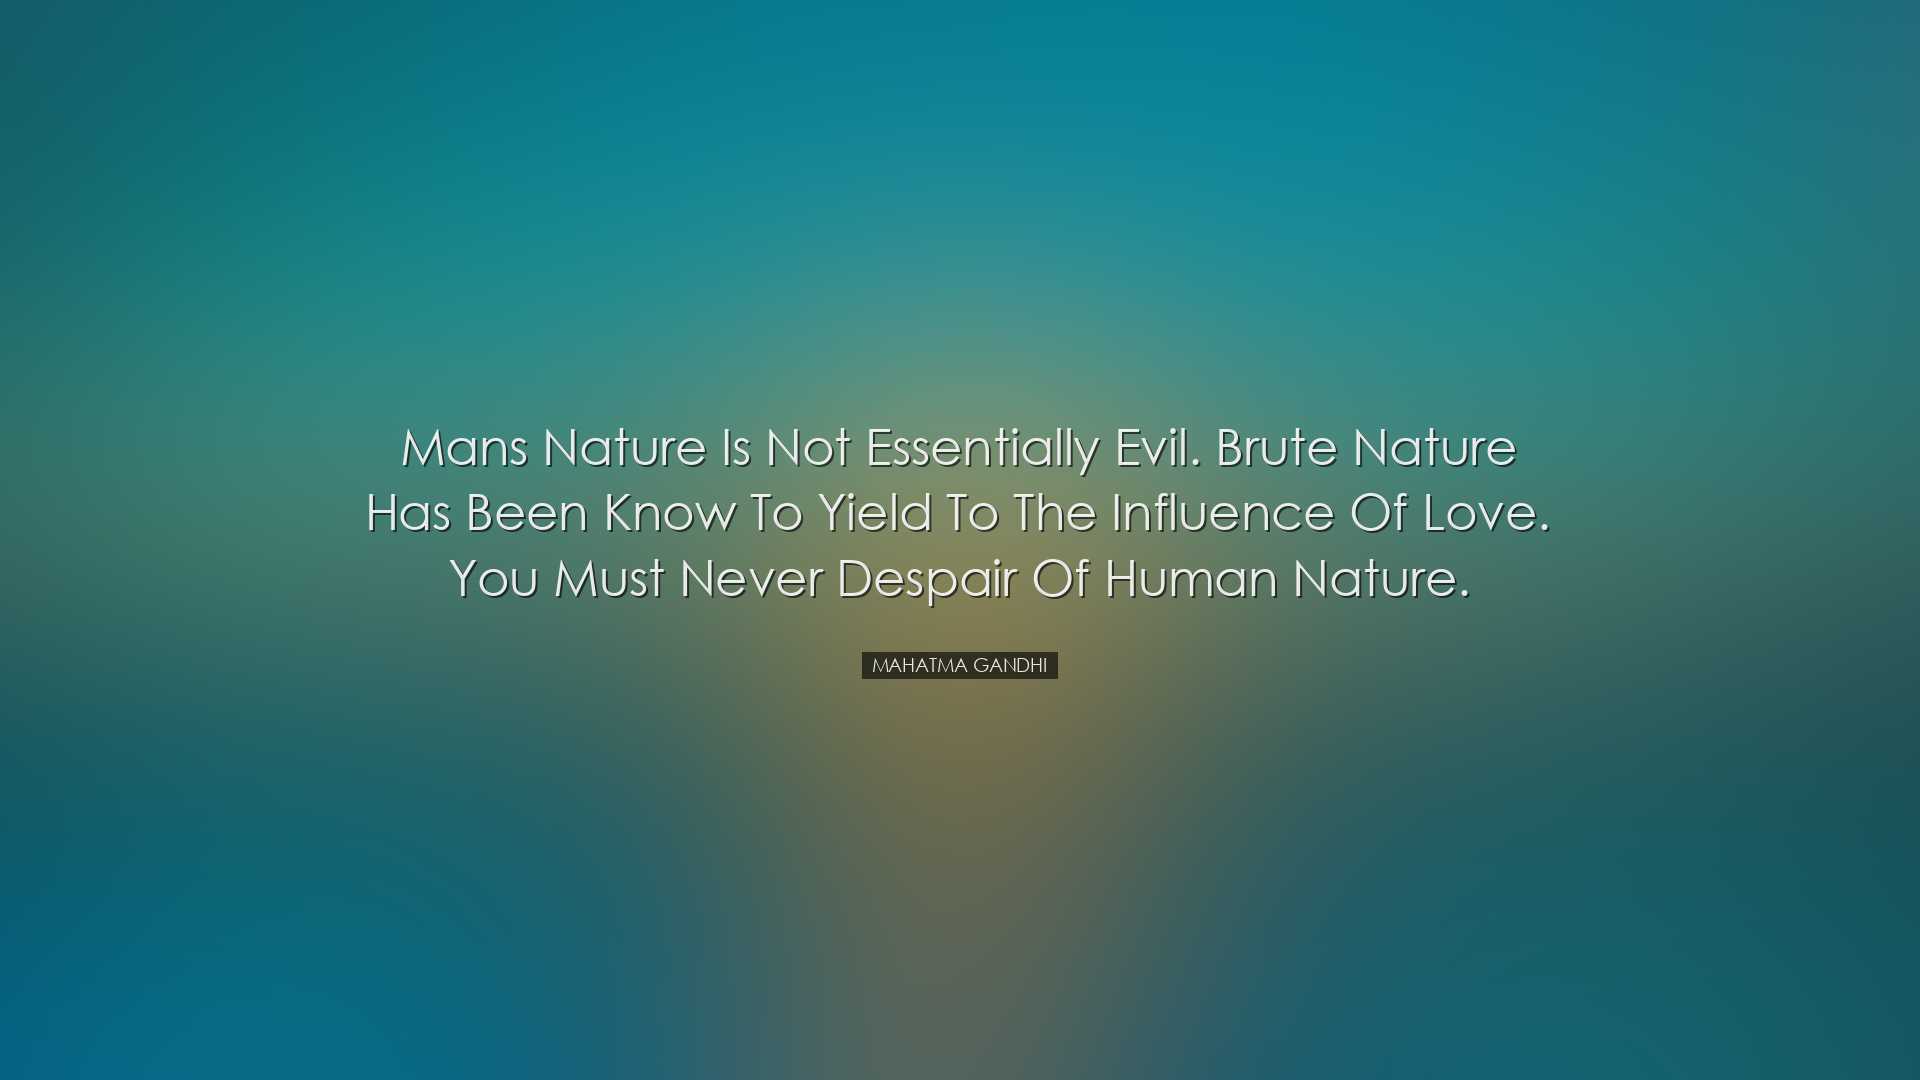 Mans nature is not essentially evil. Brute nature has been know to